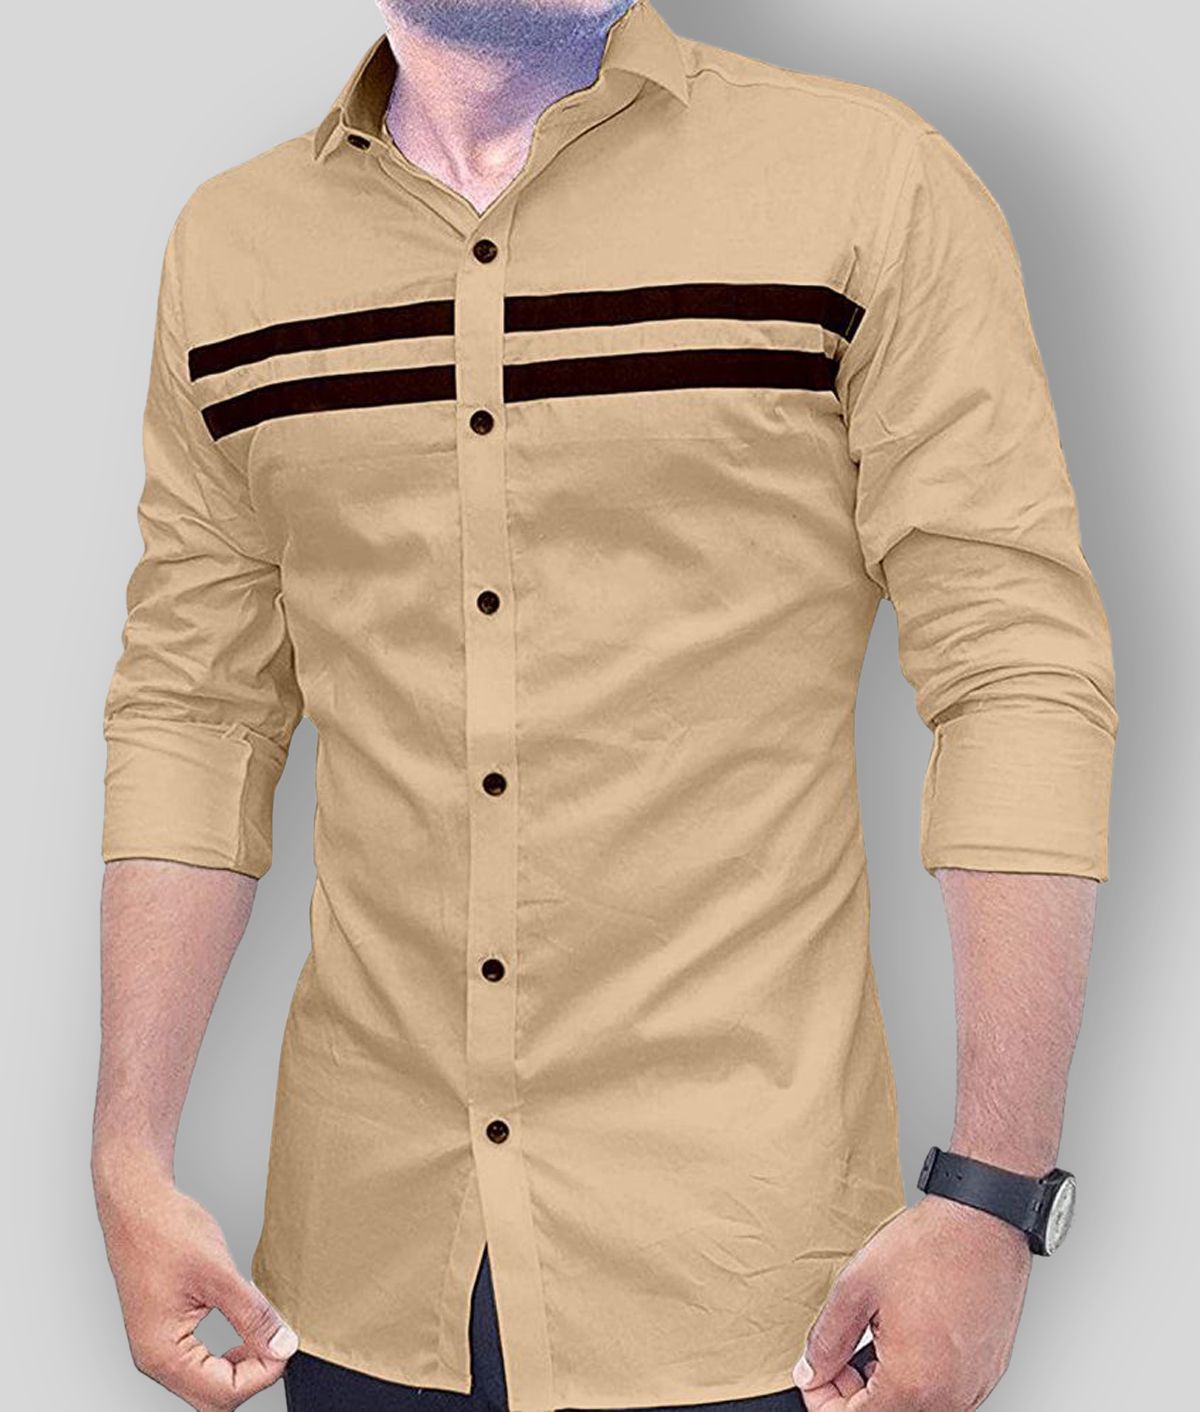     			VERTUSY Cotton Blend Regular Fit Striped Full Sleeves Men's Casual Shirt - Cream ( Pack of 1 )